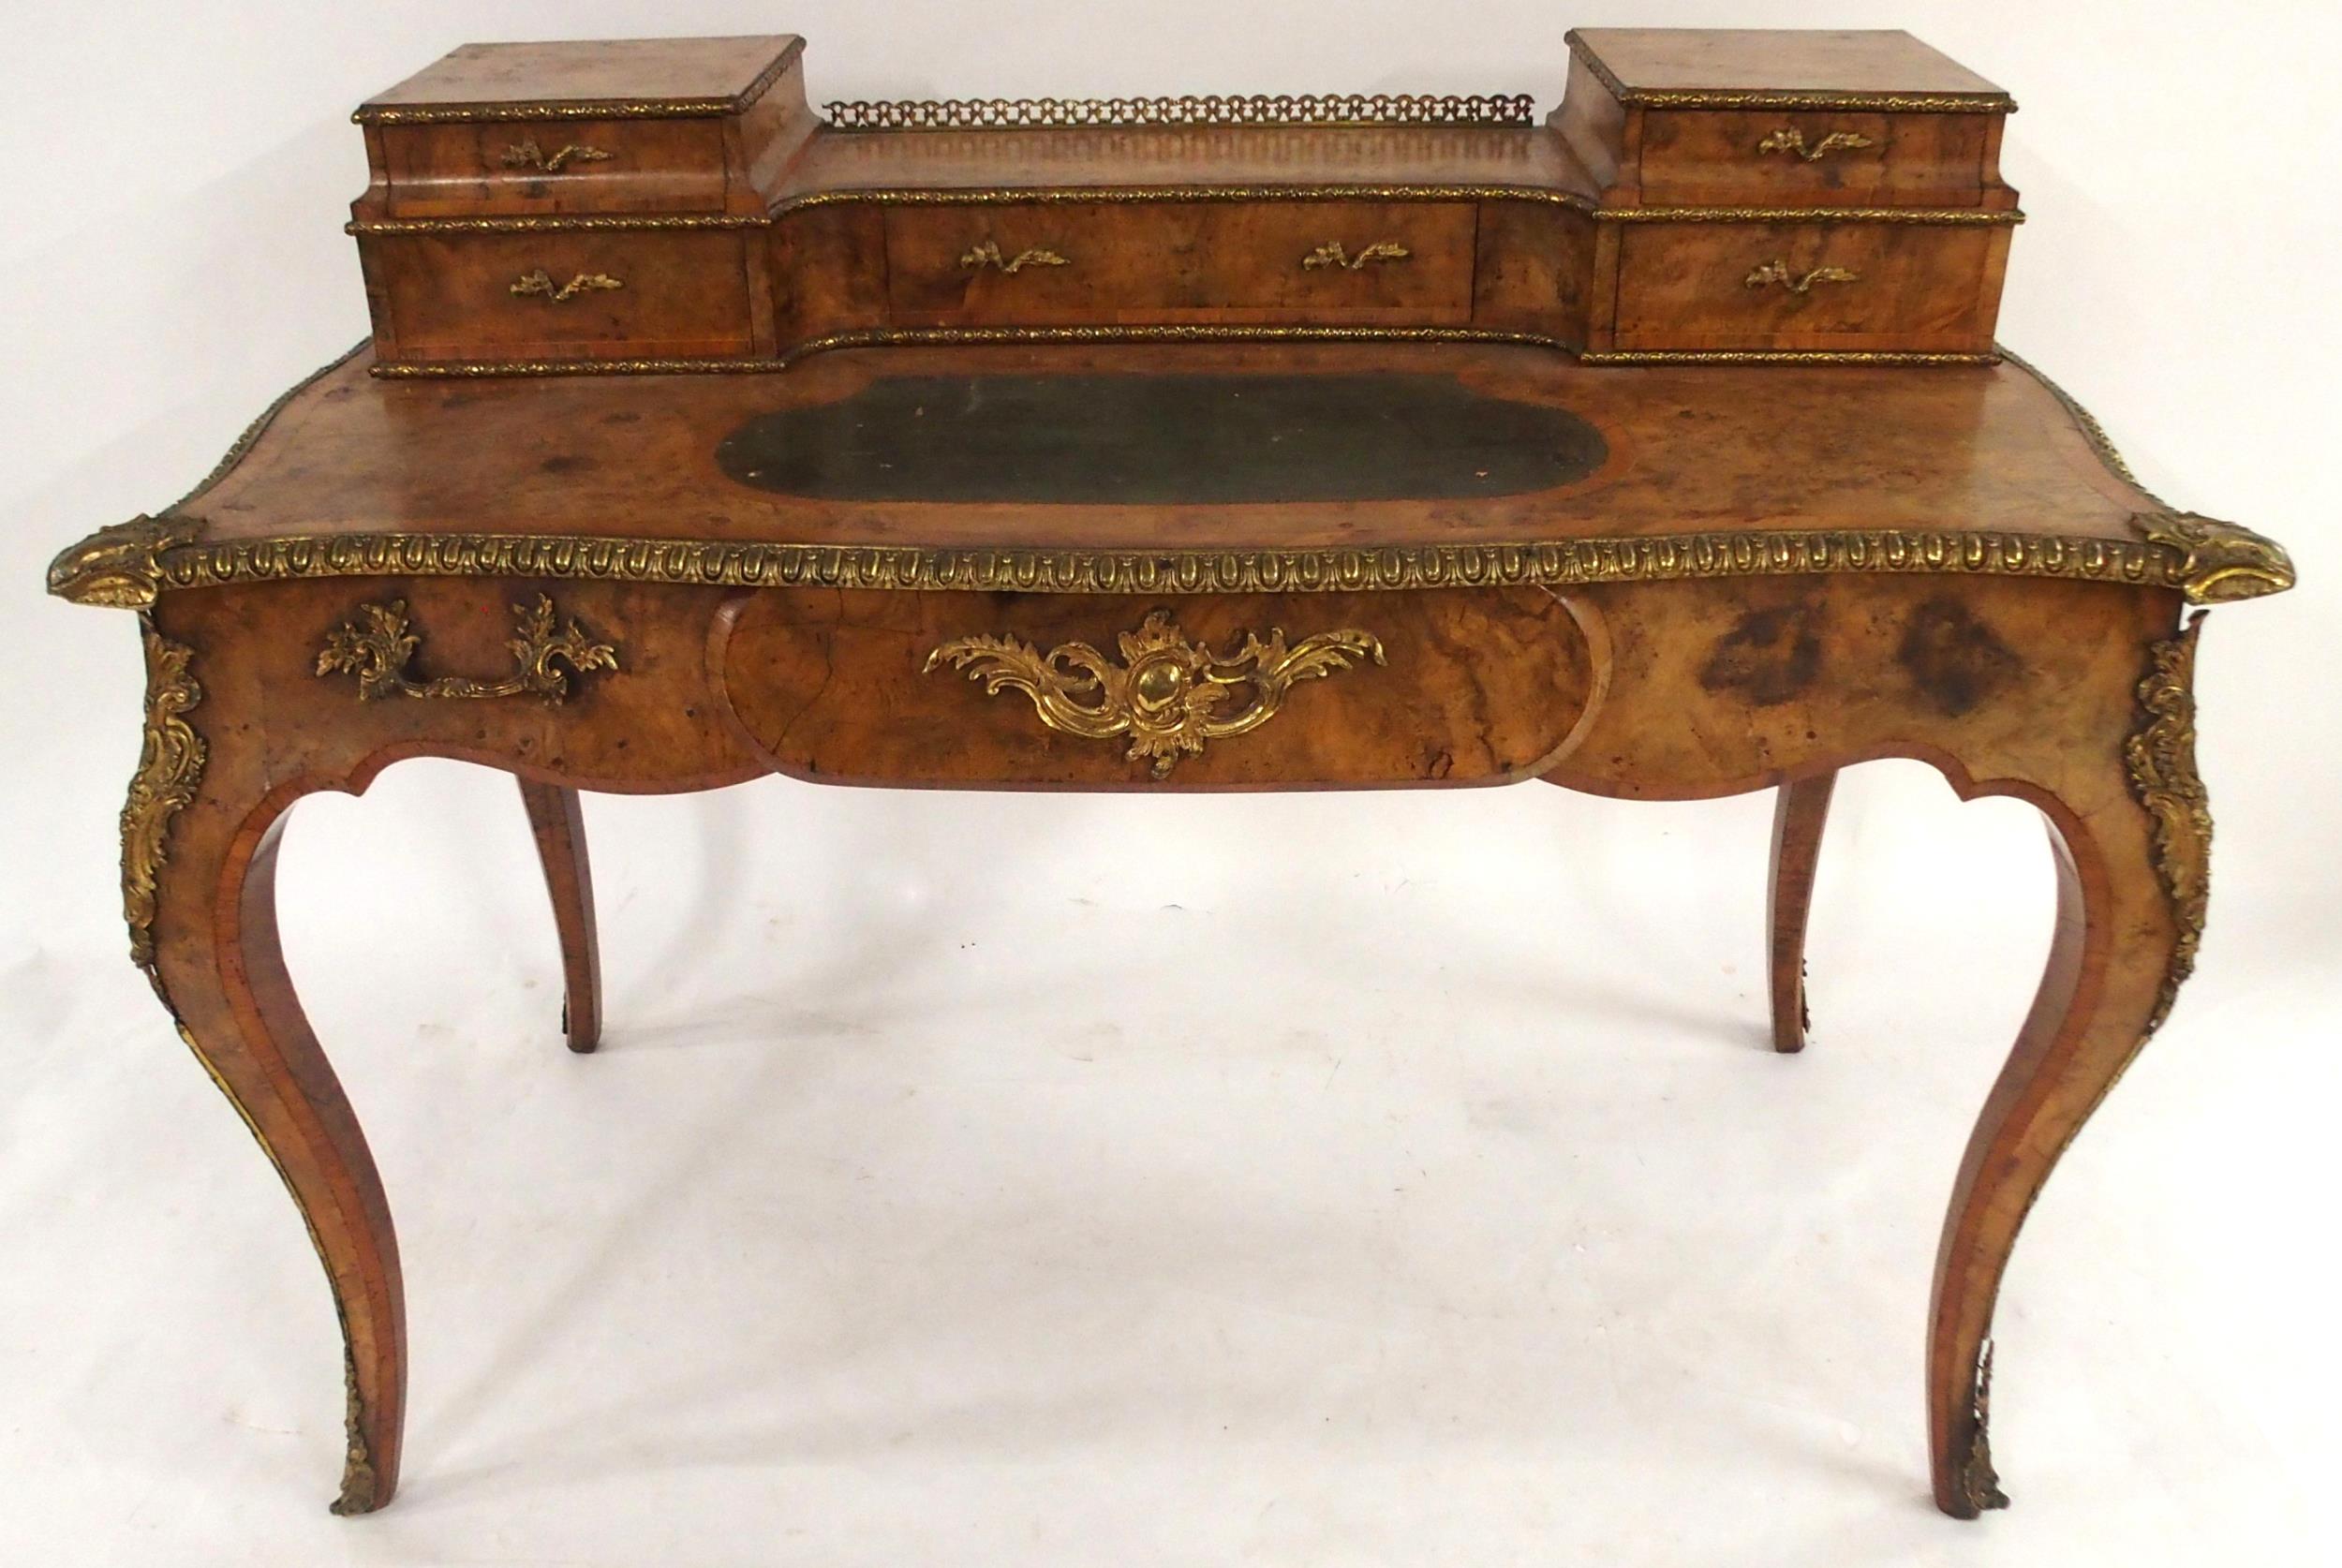 A LOUIS XVI STYLE BURR WALNUT AND ORMOLU MOUNTED BUREAU PLAT with five drawered superstructure